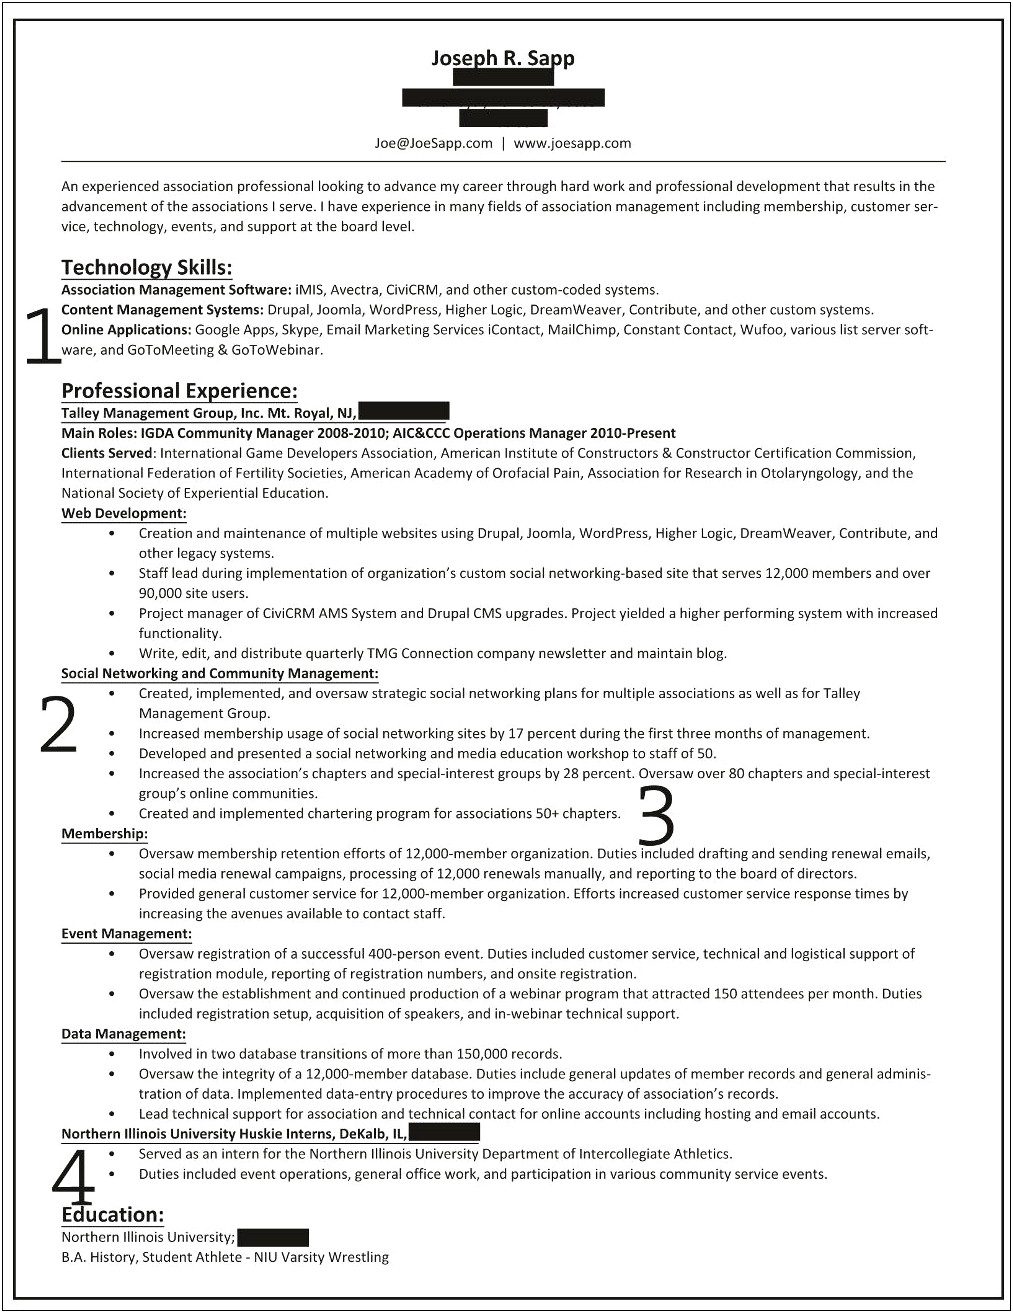 Sample Resume Professional Overview Examples